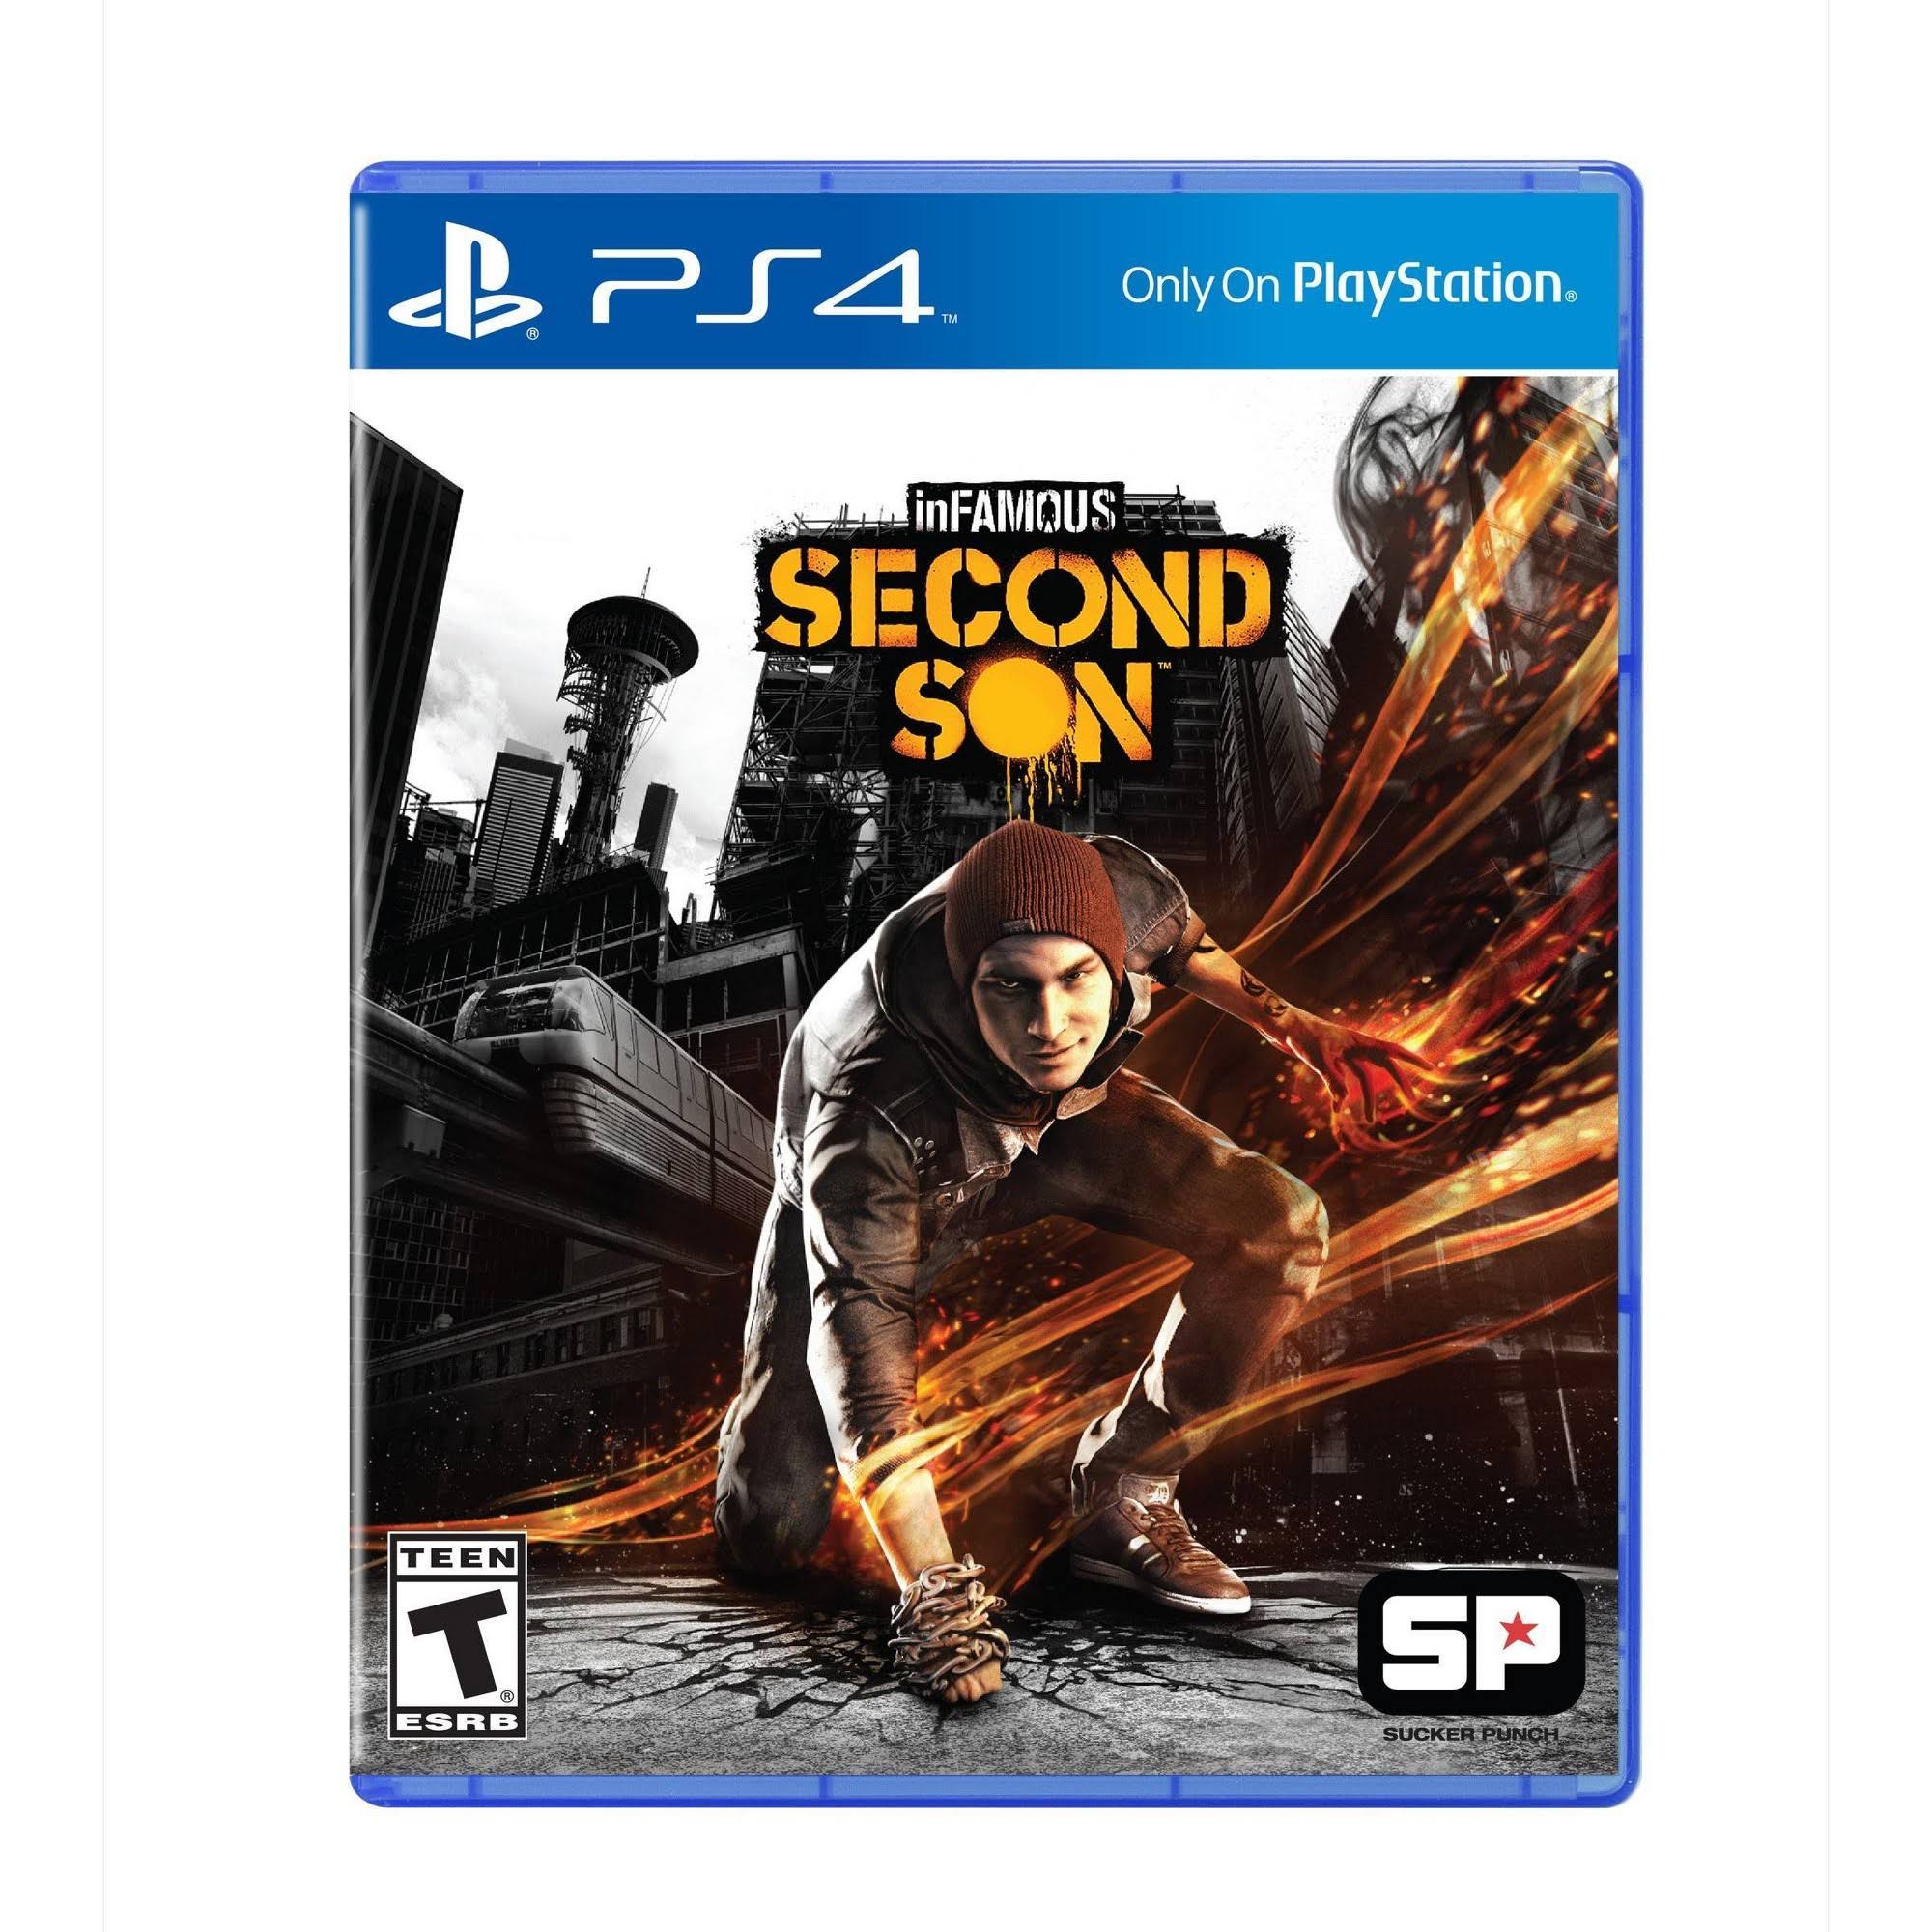 Infamous: Second Son - PlayStation 4